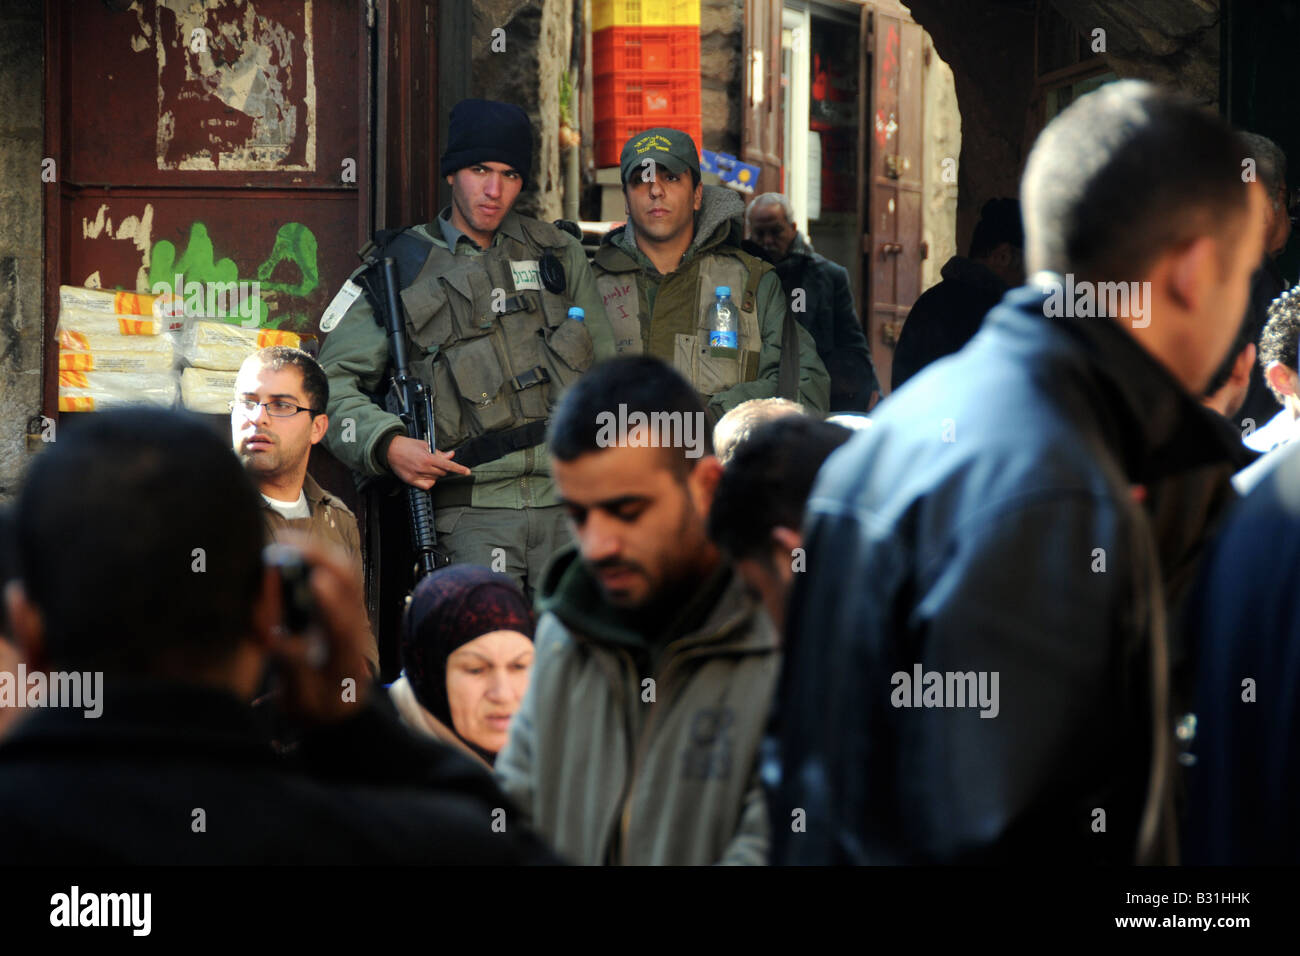 Two Israeli soldiers patrolling an area of the Arab market in Jerusalem's Old City. Stock Photo